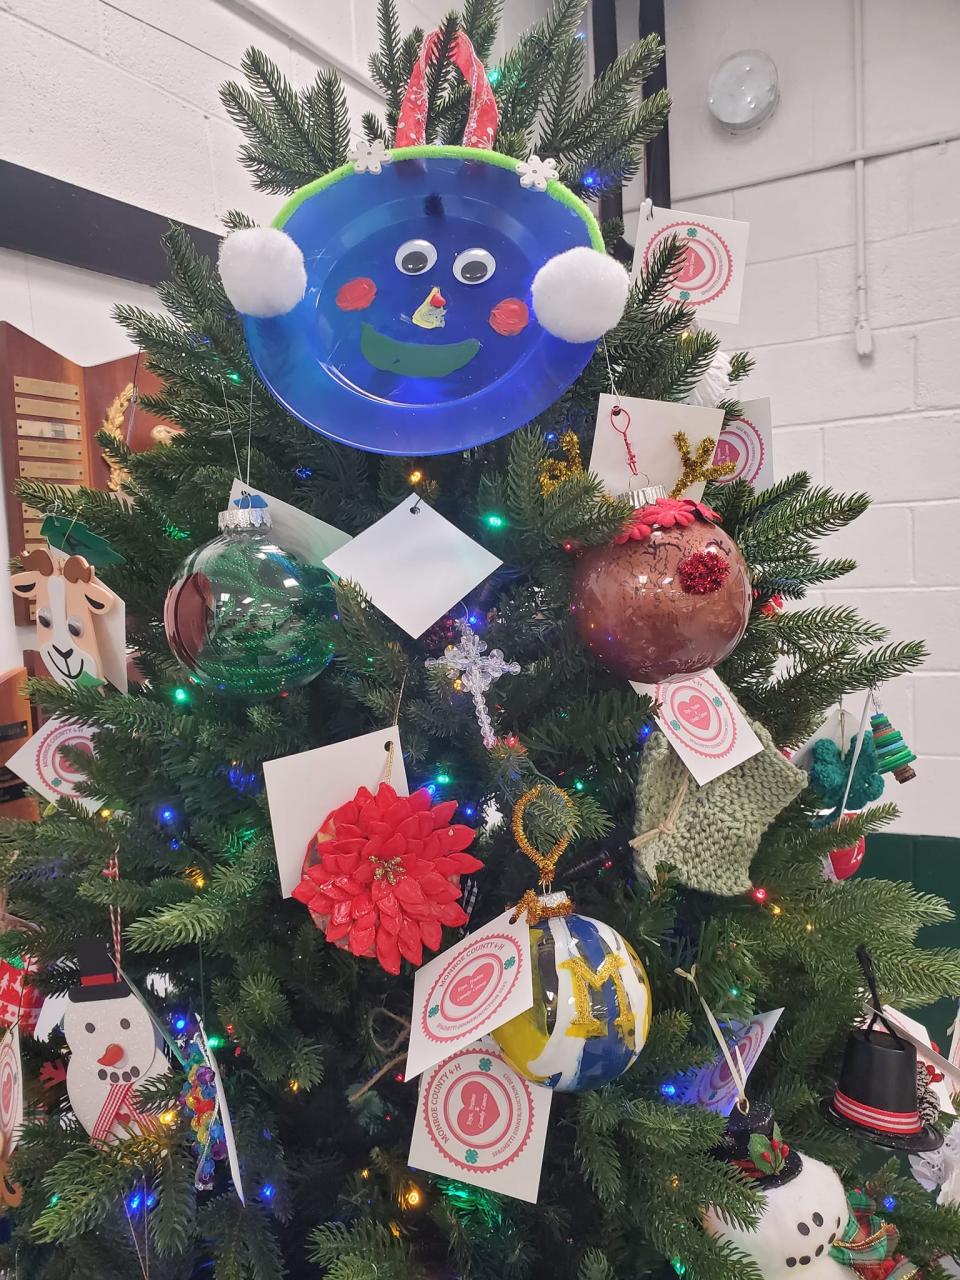 A Christmas tree ornament auction debuted at this year's dinner. 4-H youth made handmade ornaments that were sold for donations. The ornament sale raised nearly $400 for the 4-H program.